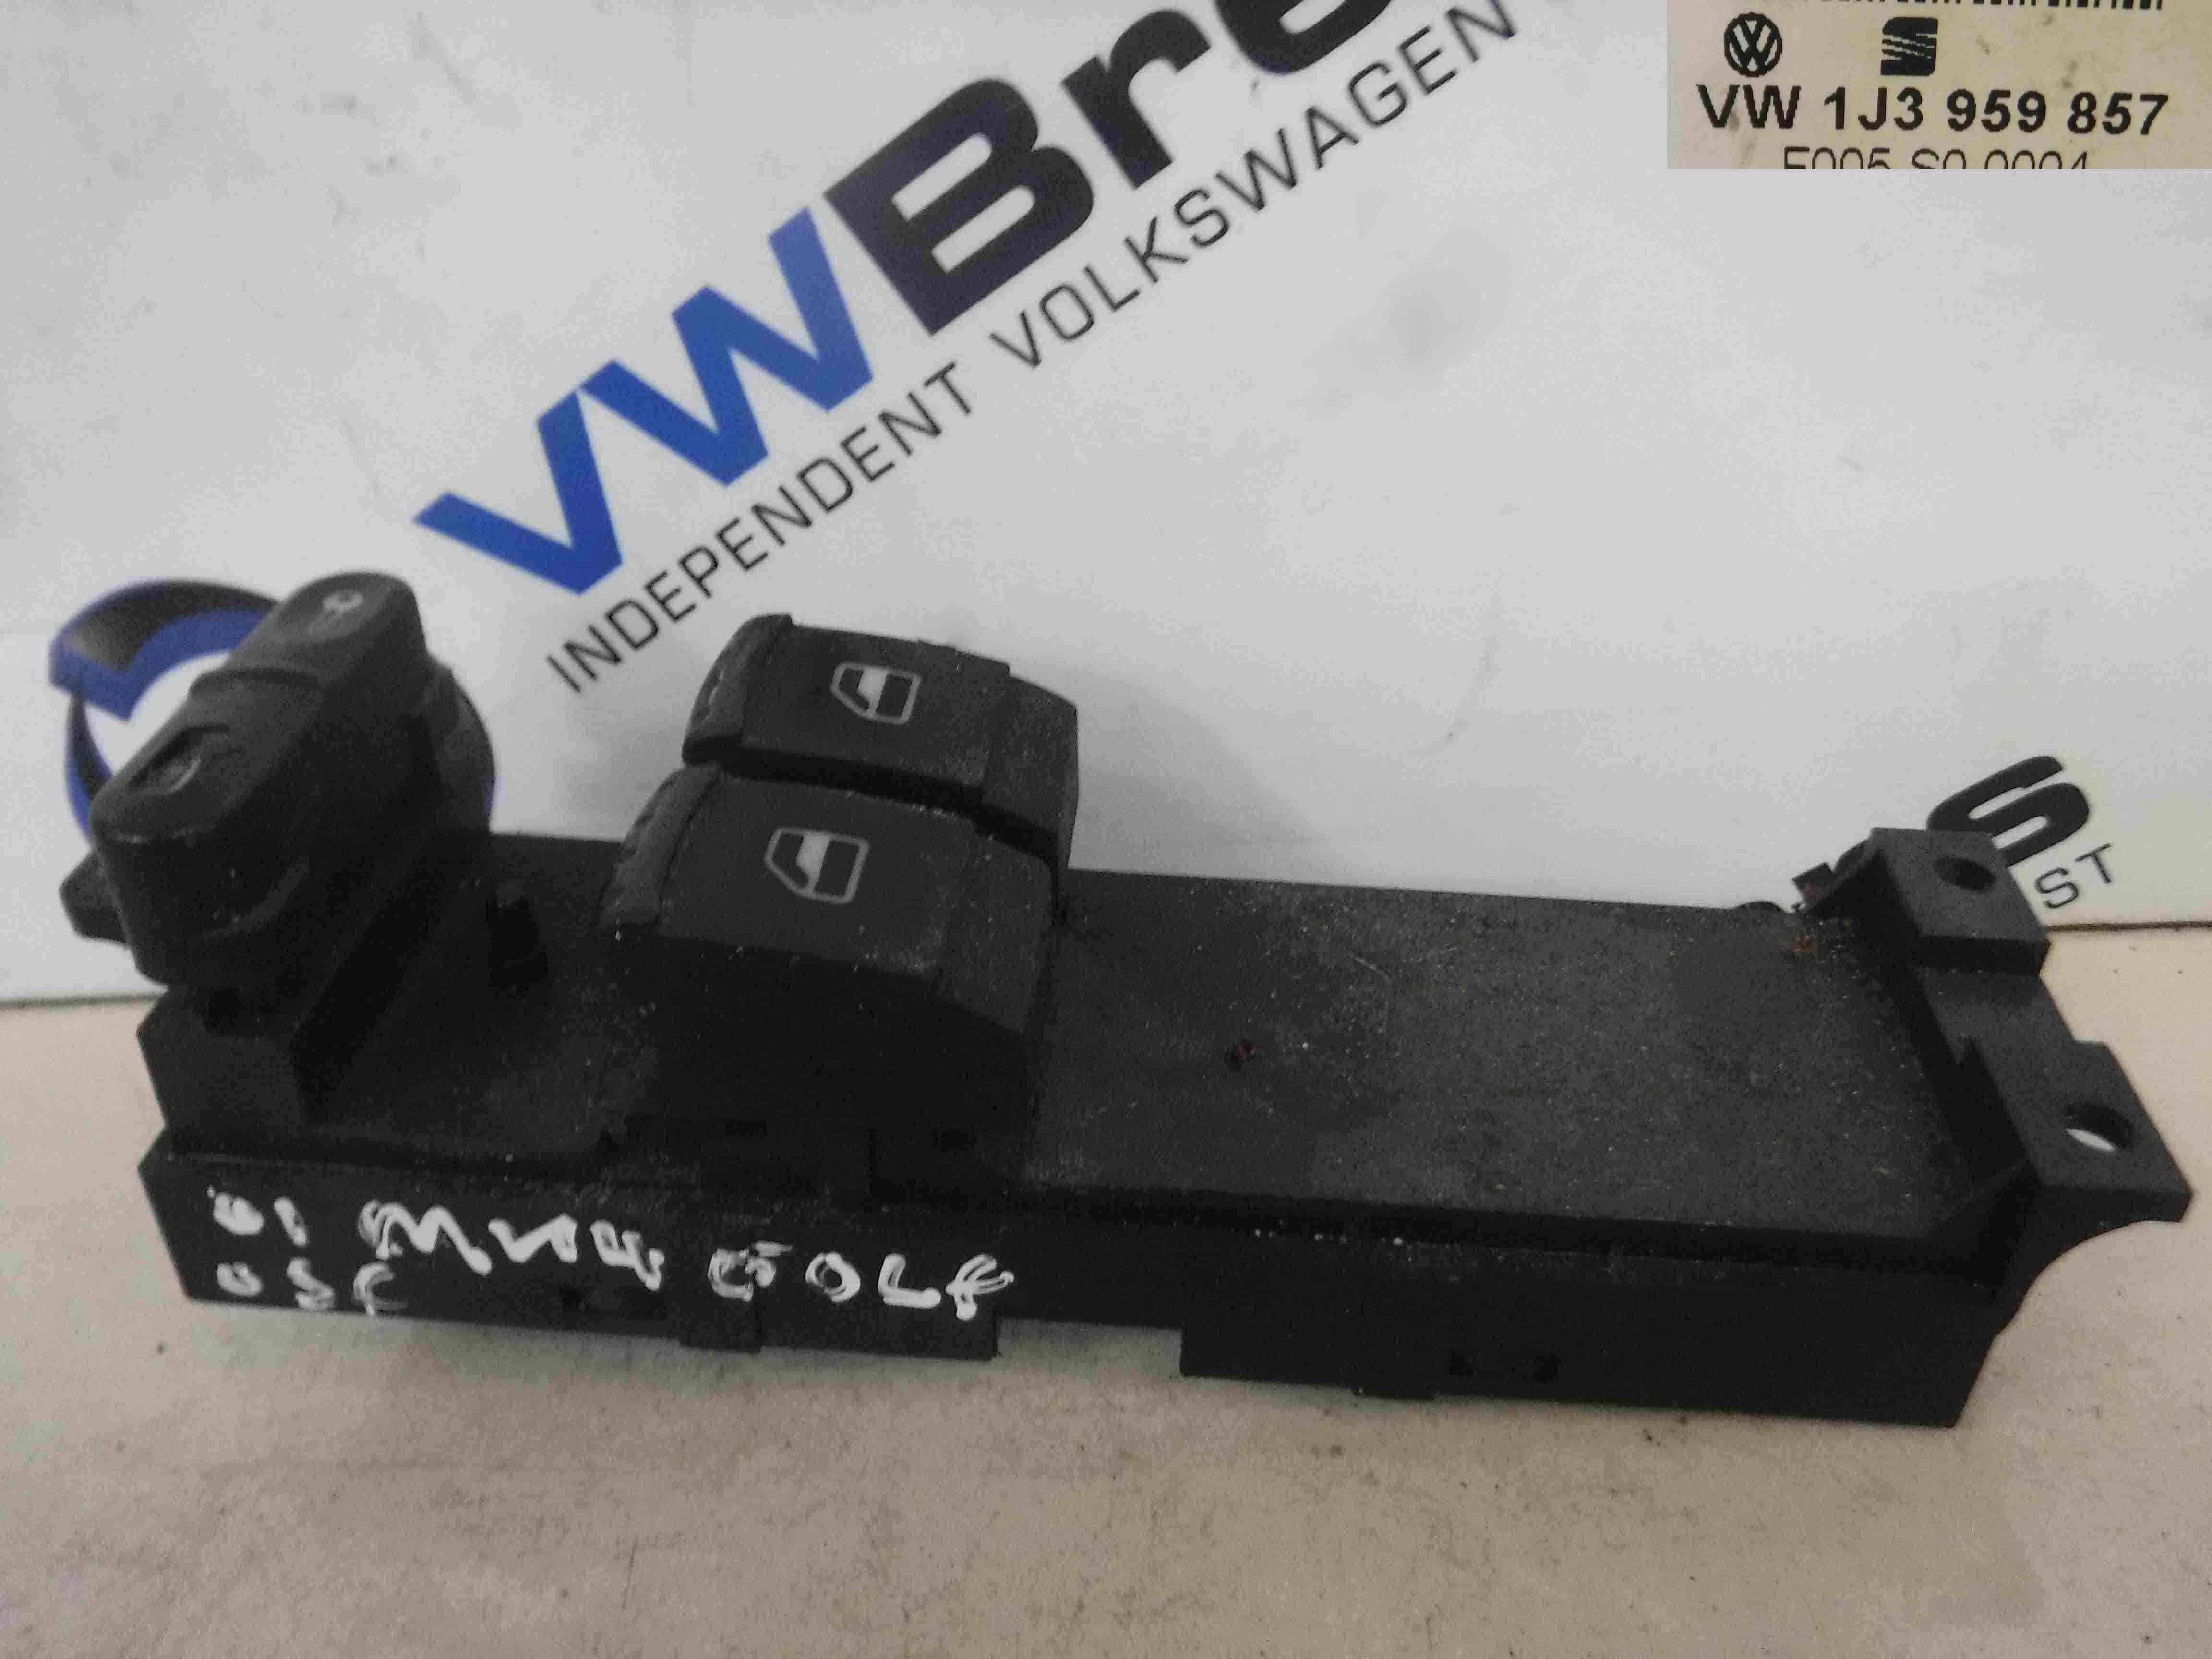 Volkswagen Golf MK4 1997-2004 Drivers OSF Front Window Switch Panel 1J3959857